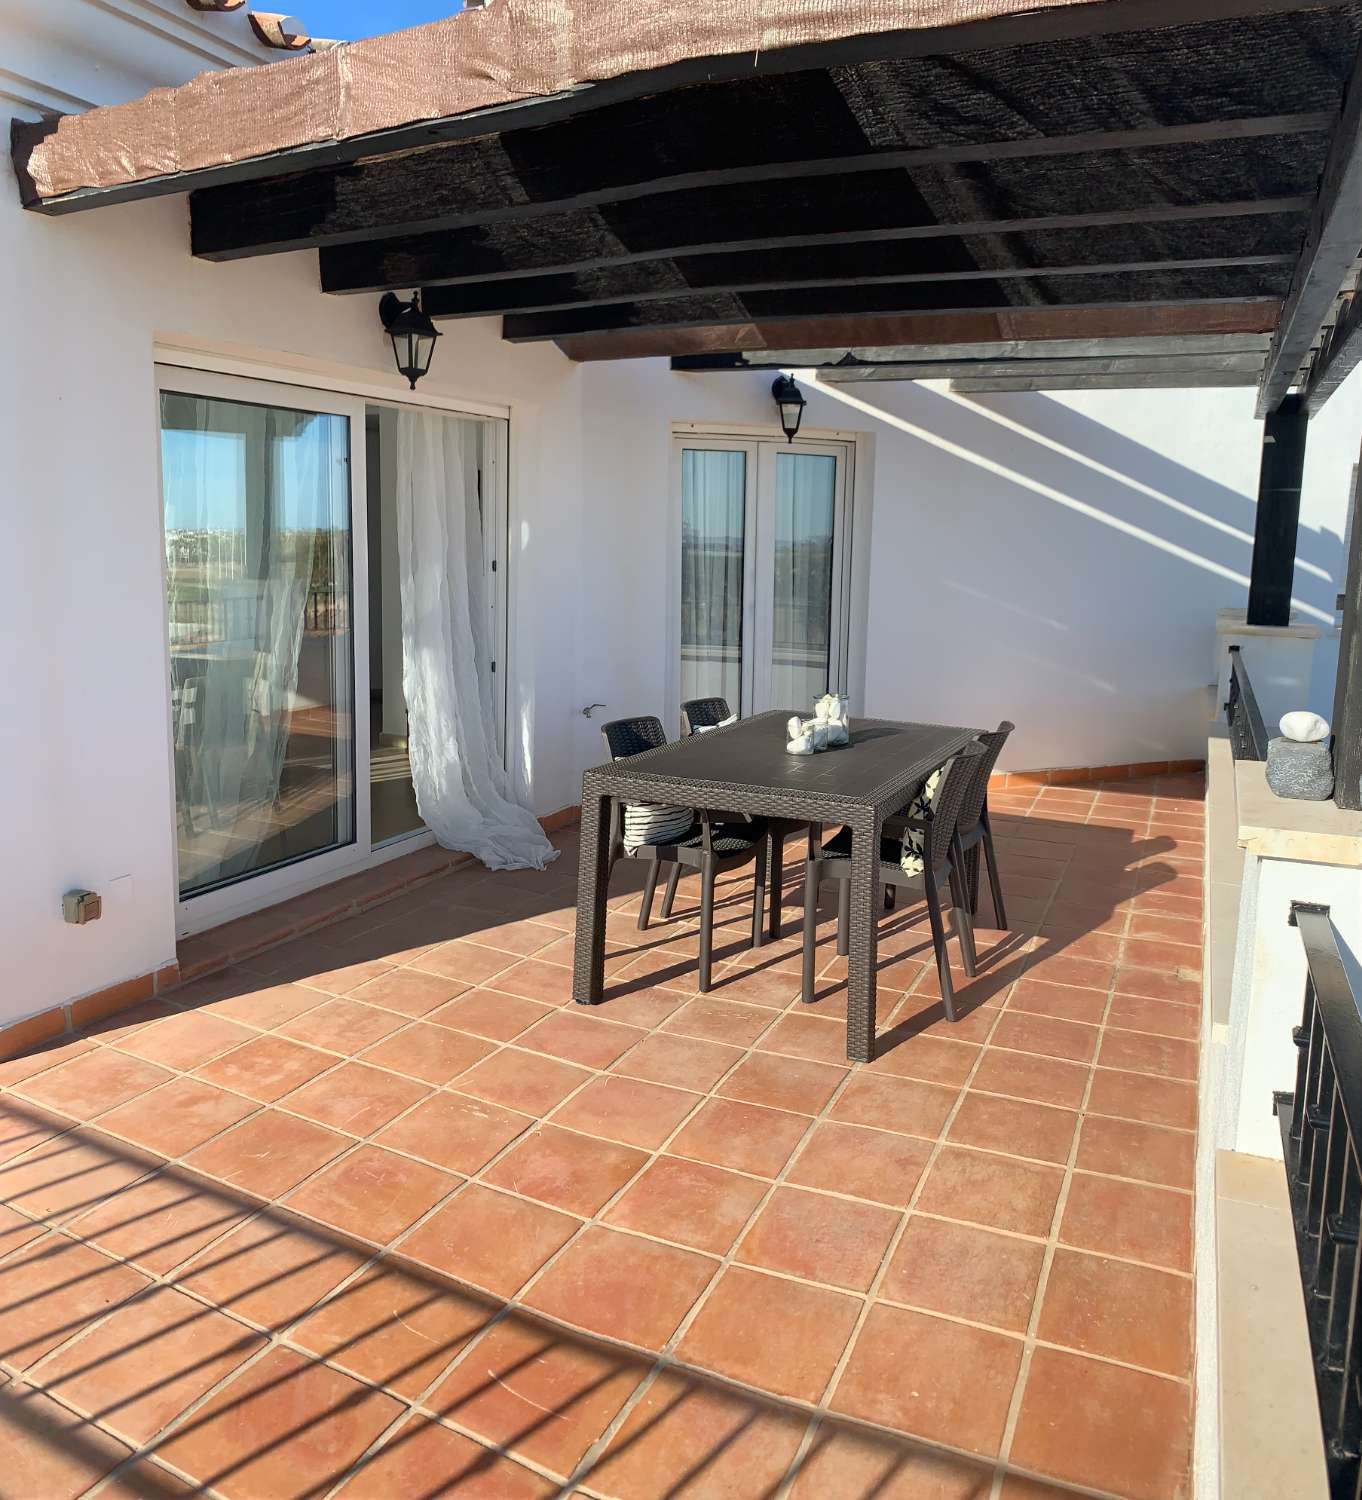 PENTHOUSE FOR SALE WITH FABULOUS VIEWS IN LA TORRE GOLF RESORT